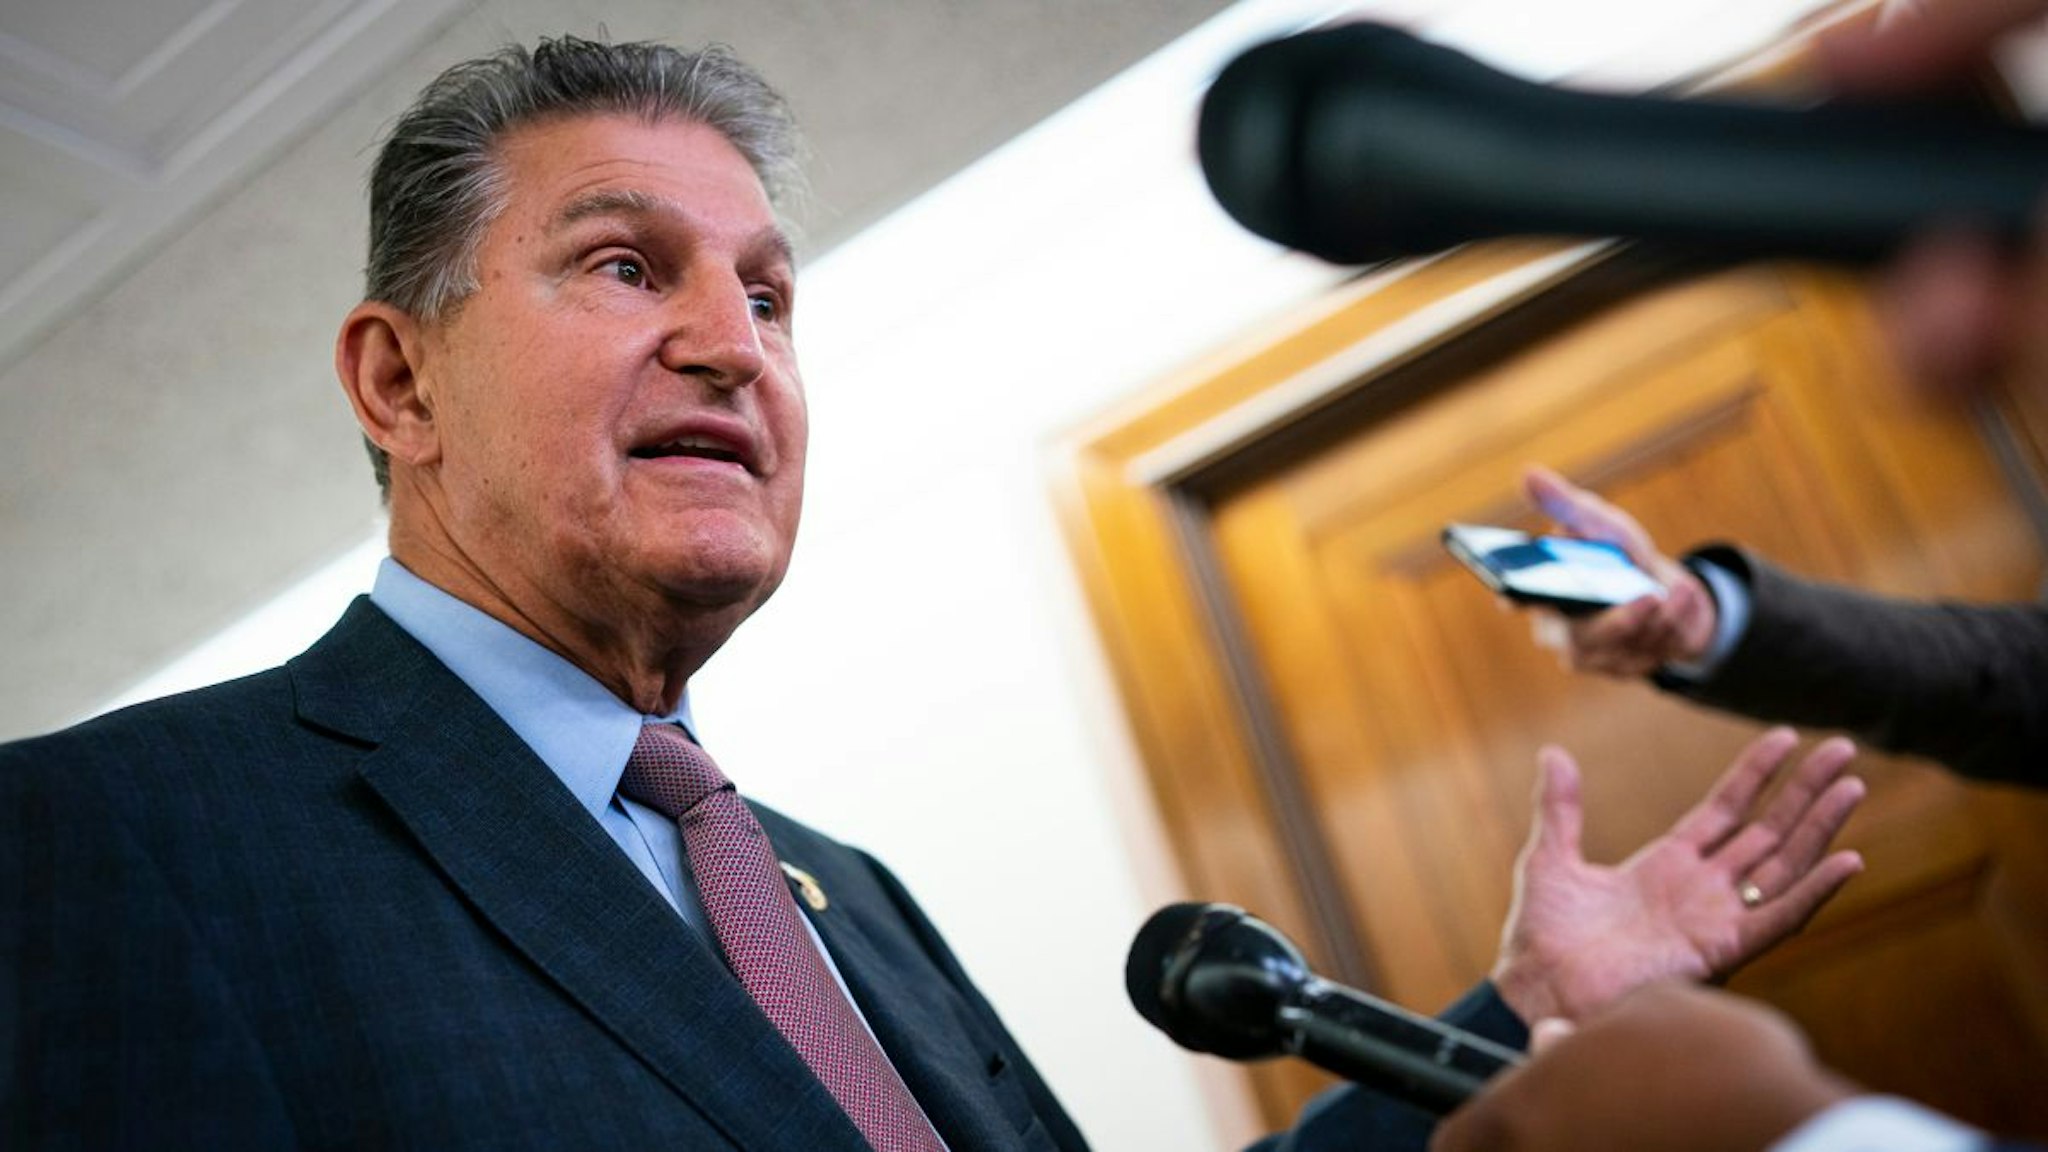 Senator Joe Manchin, a Democrat from West Virginia and chairman of the Senate Energy and Natural Resources Committee, speaks to members of the media prior to a hearing in Washington, D.C., US, on Tuesday, July 19, 2022.